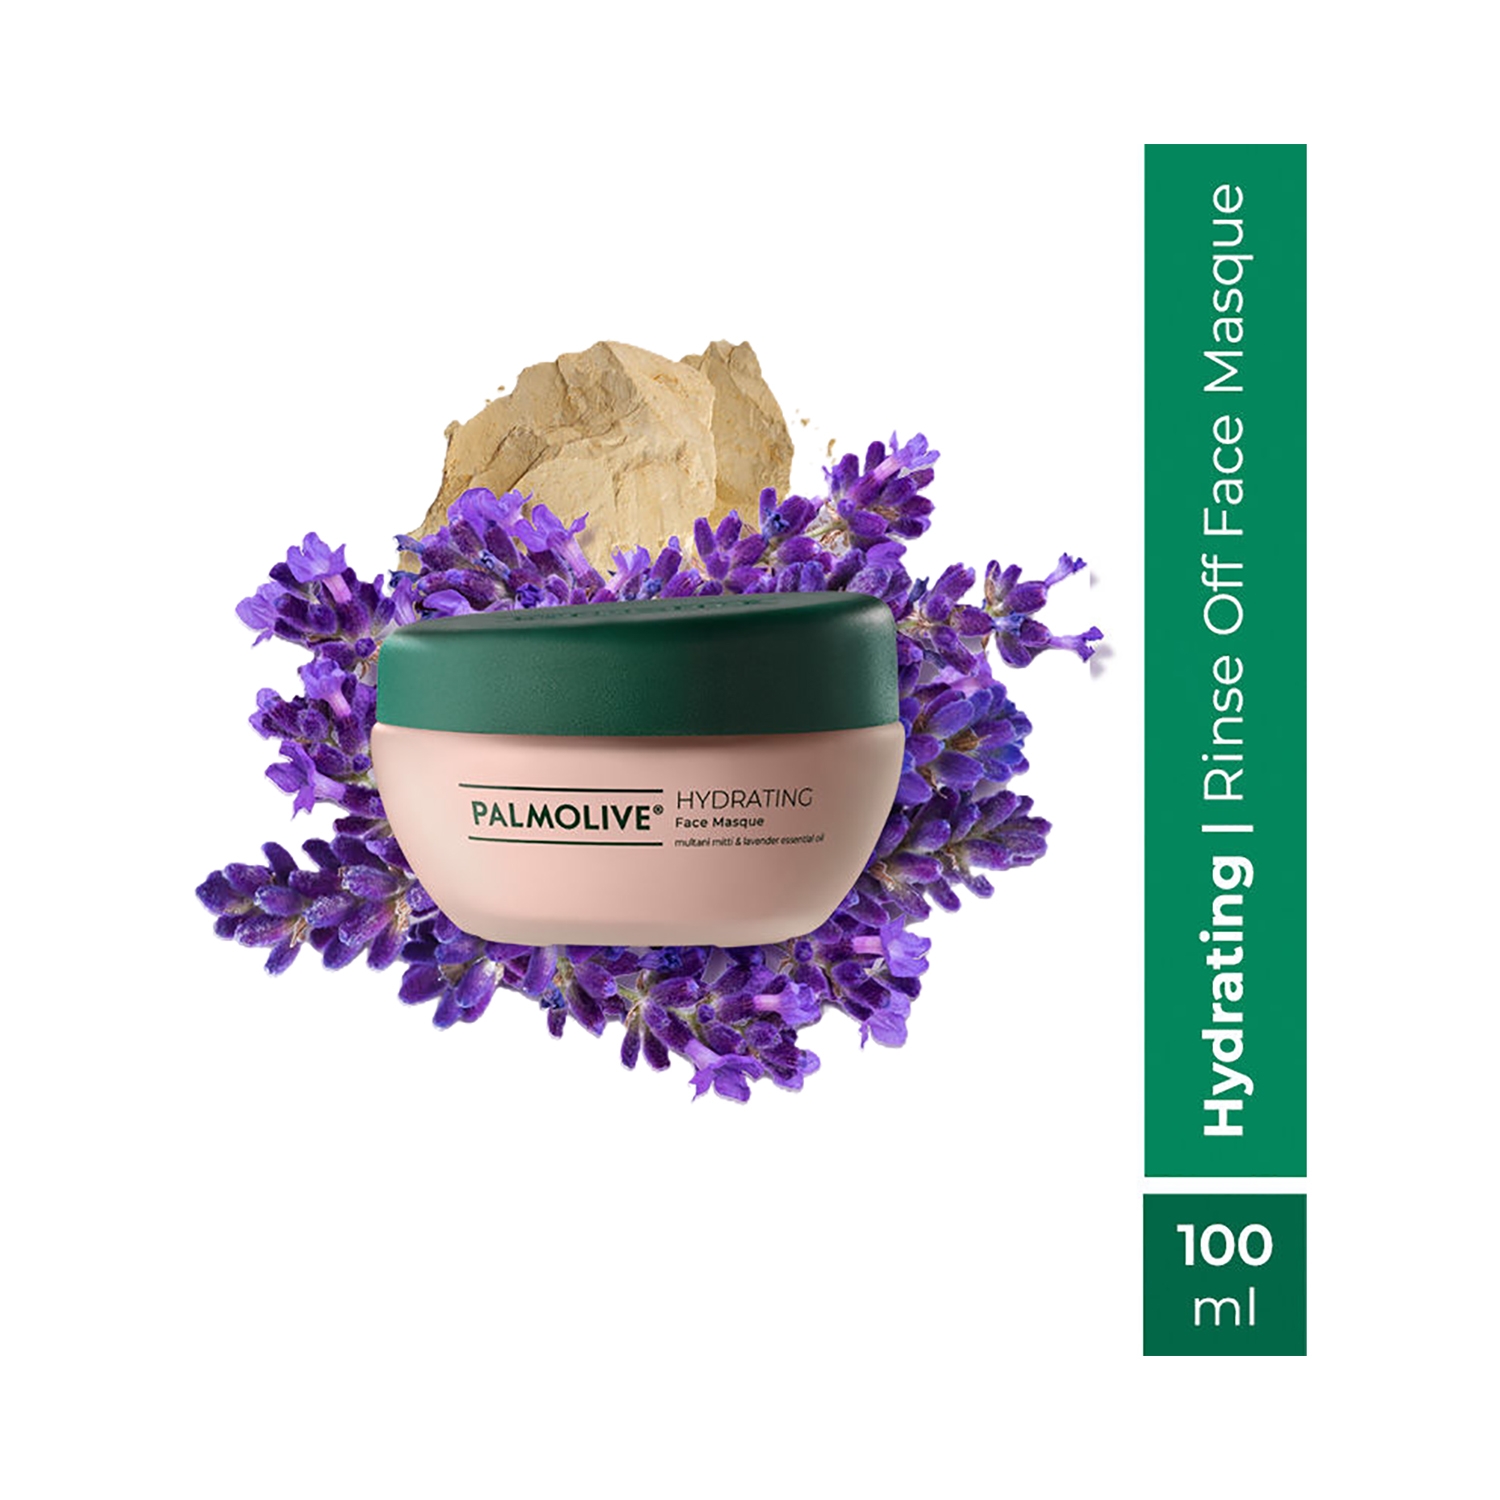 Palmolive | Palmolive Hydrating Face Masque (100ml)